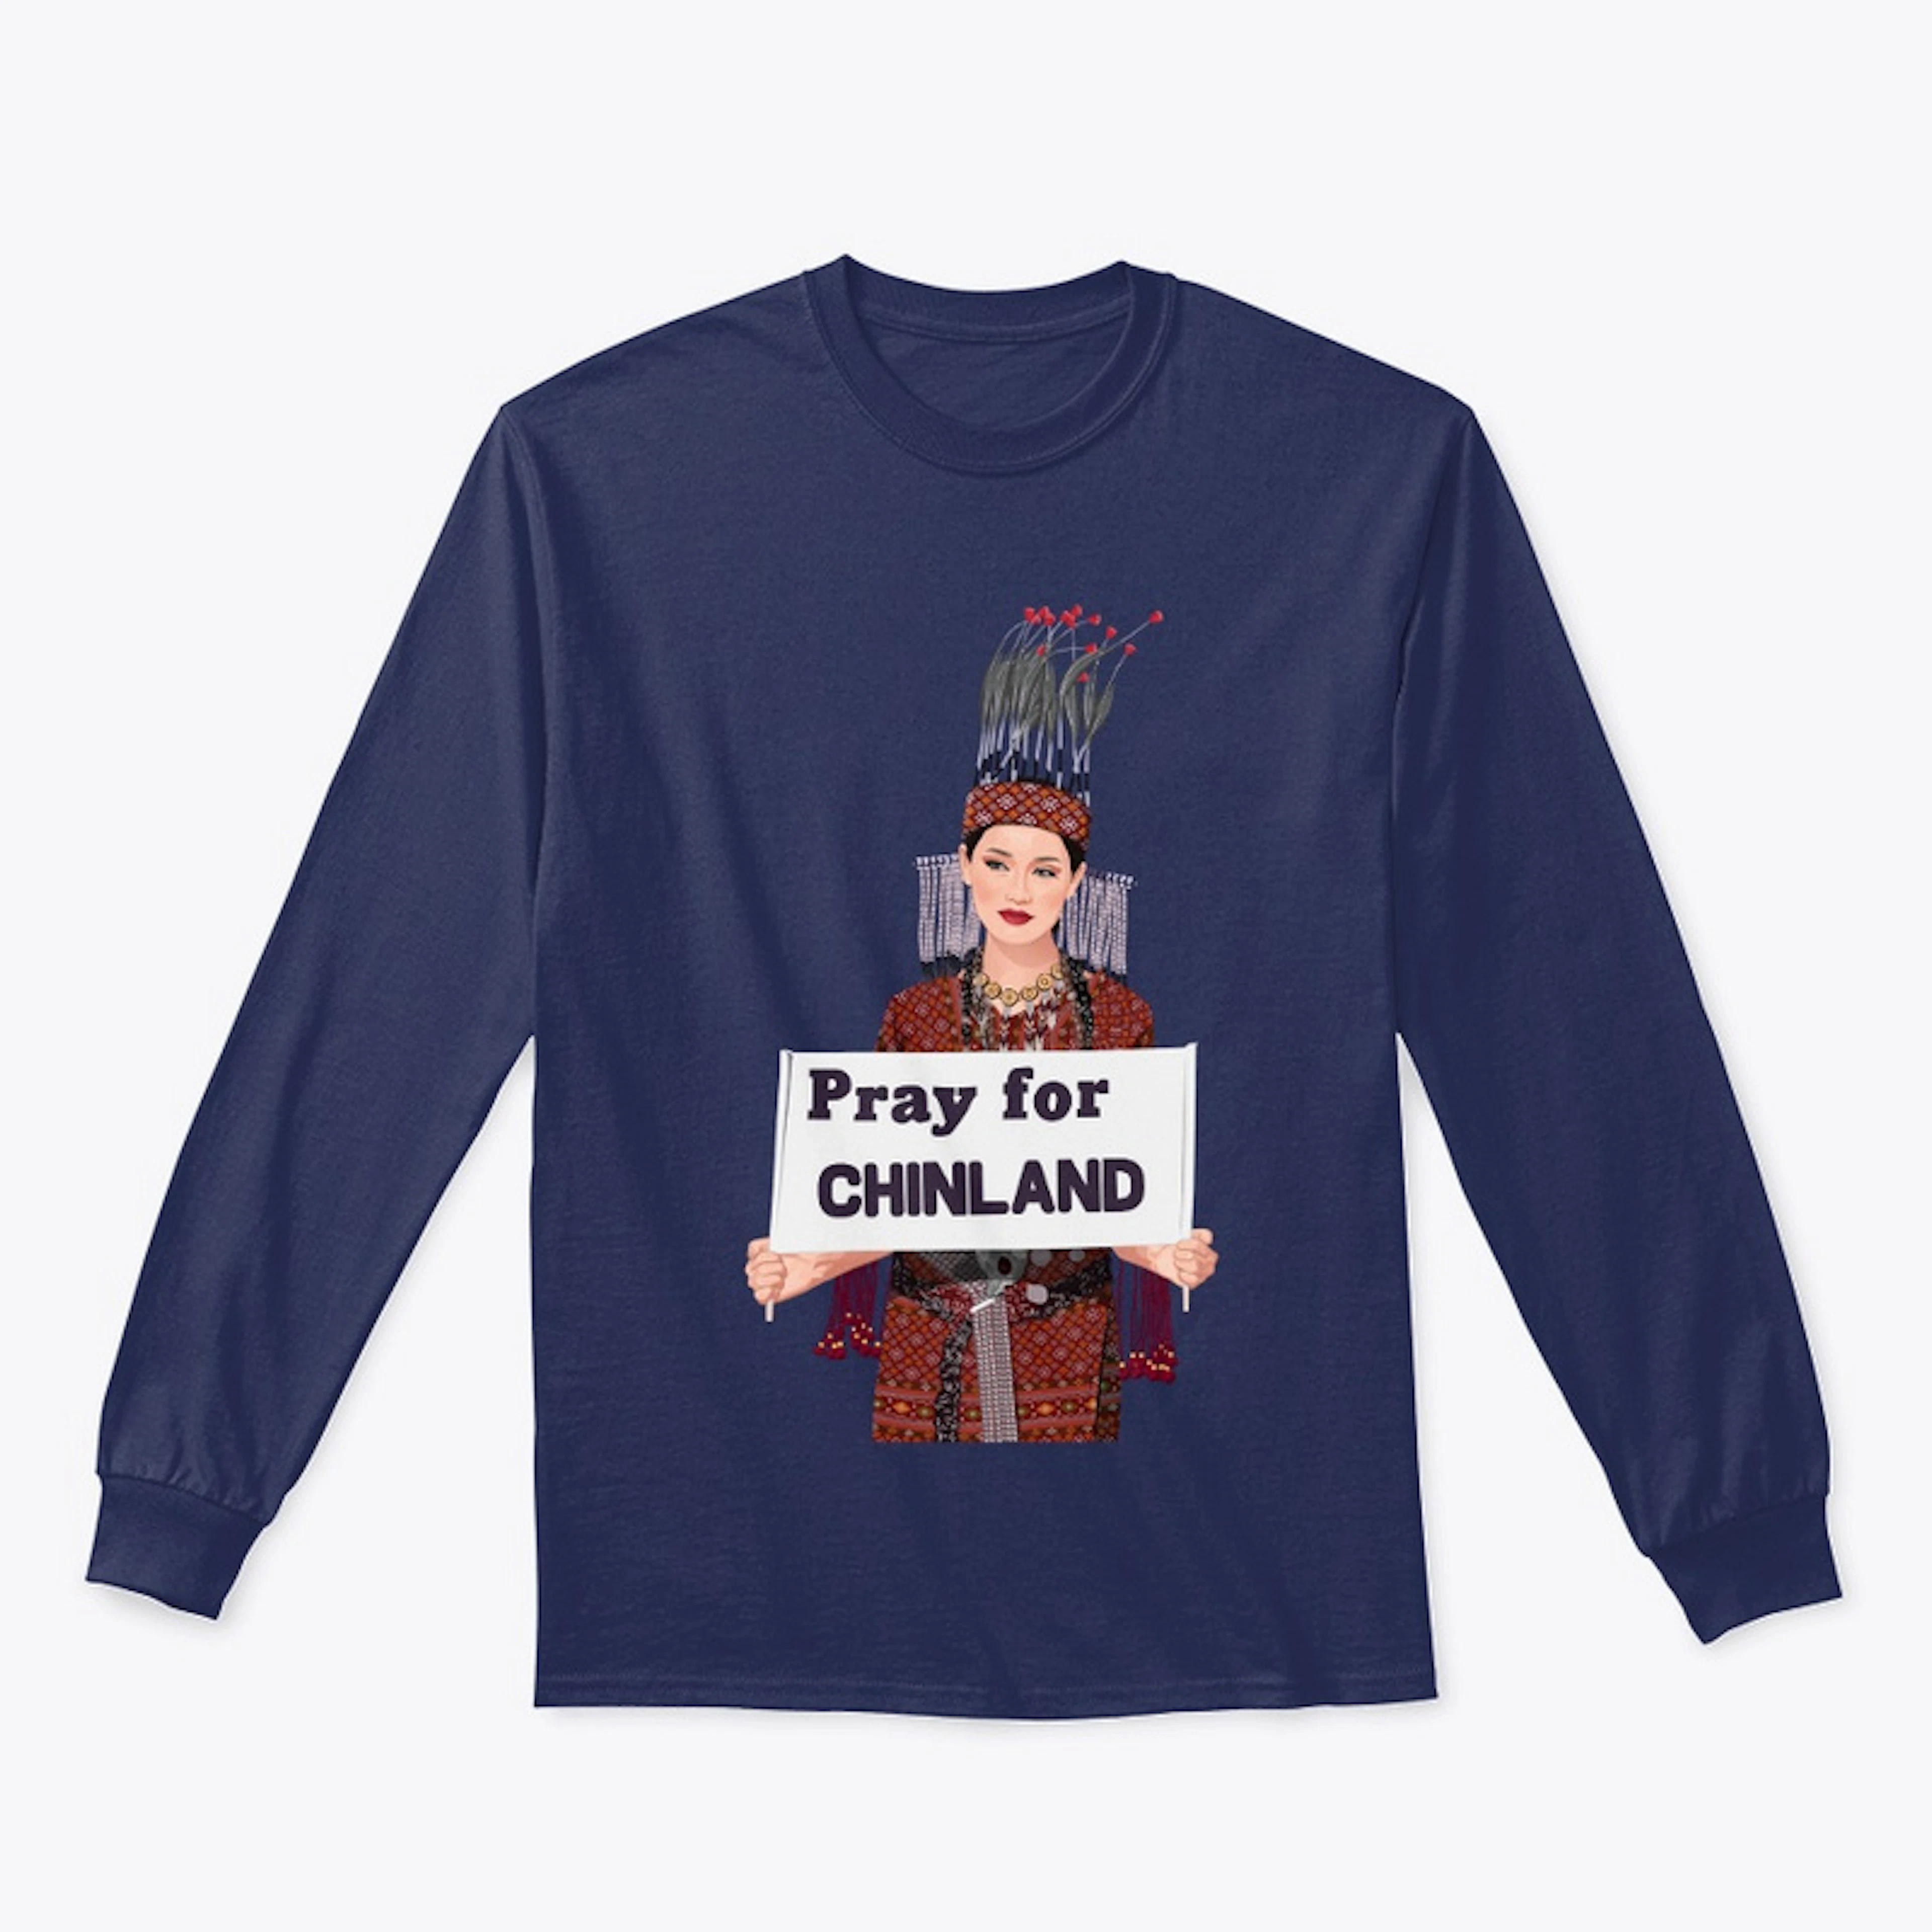 Show your Support for Chinland